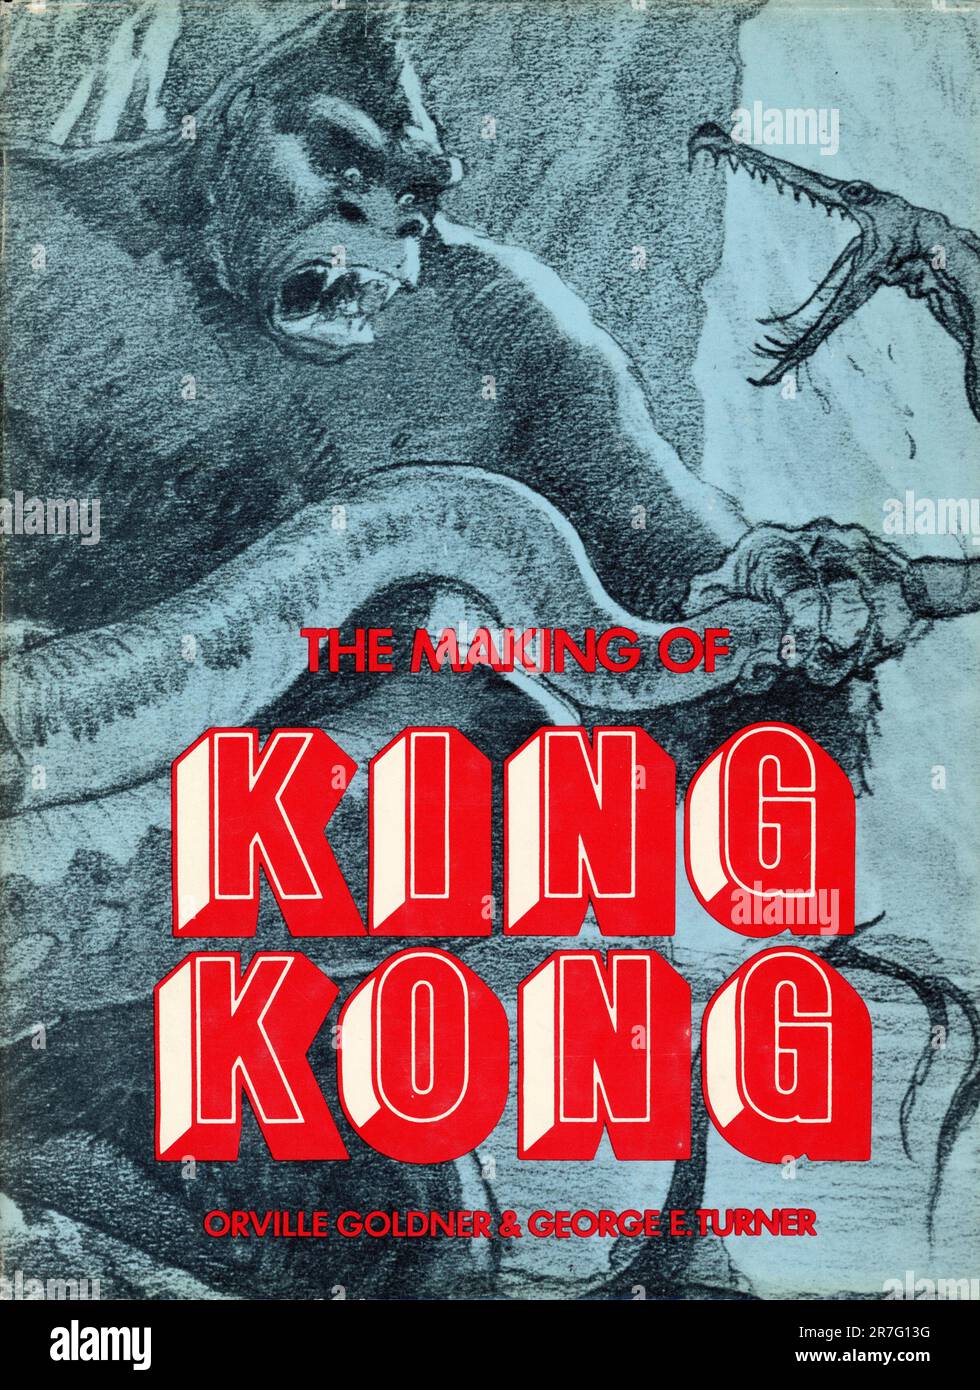 Front of Dust Jacket / couverture de l'édition 1975 1st du livre THE MAKING OF KING KONG The Story Behind the film classic by ORVILLE GOLDNER and GEORGE E. TURNER Published by A.S. Barnes and Company aux États-Unis et The Tantivy Press en Angleterre Banque D'Images